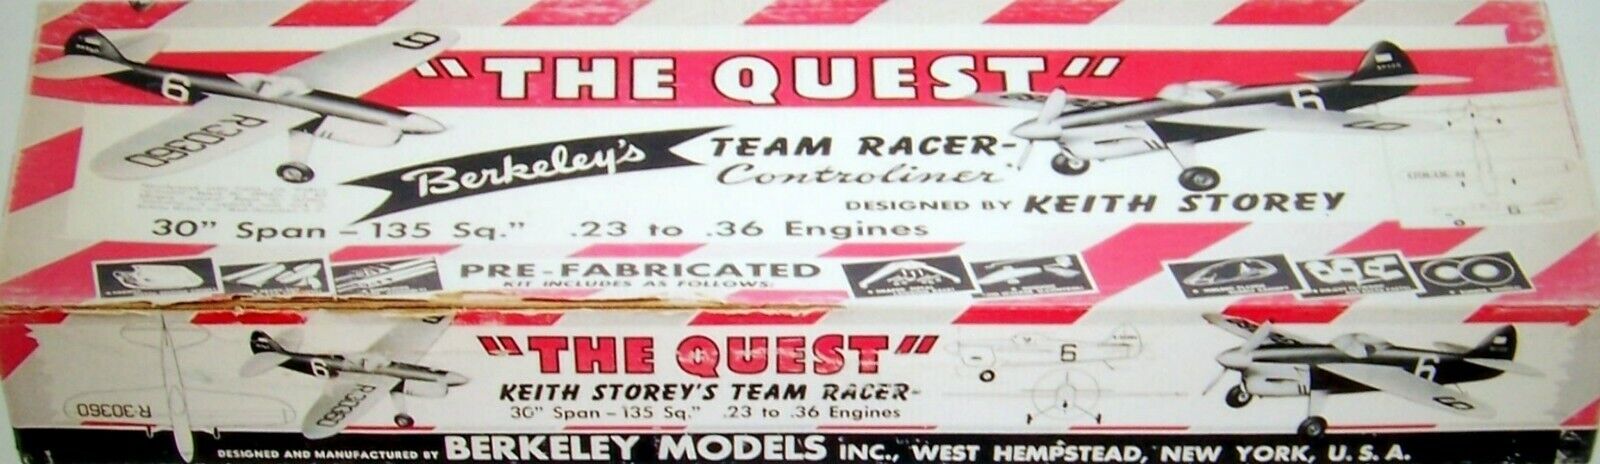 Berkeley TWO QUEST PLANS + CONSTRUCTION ARTICLE of UC TEAM RACER Model Airplane 